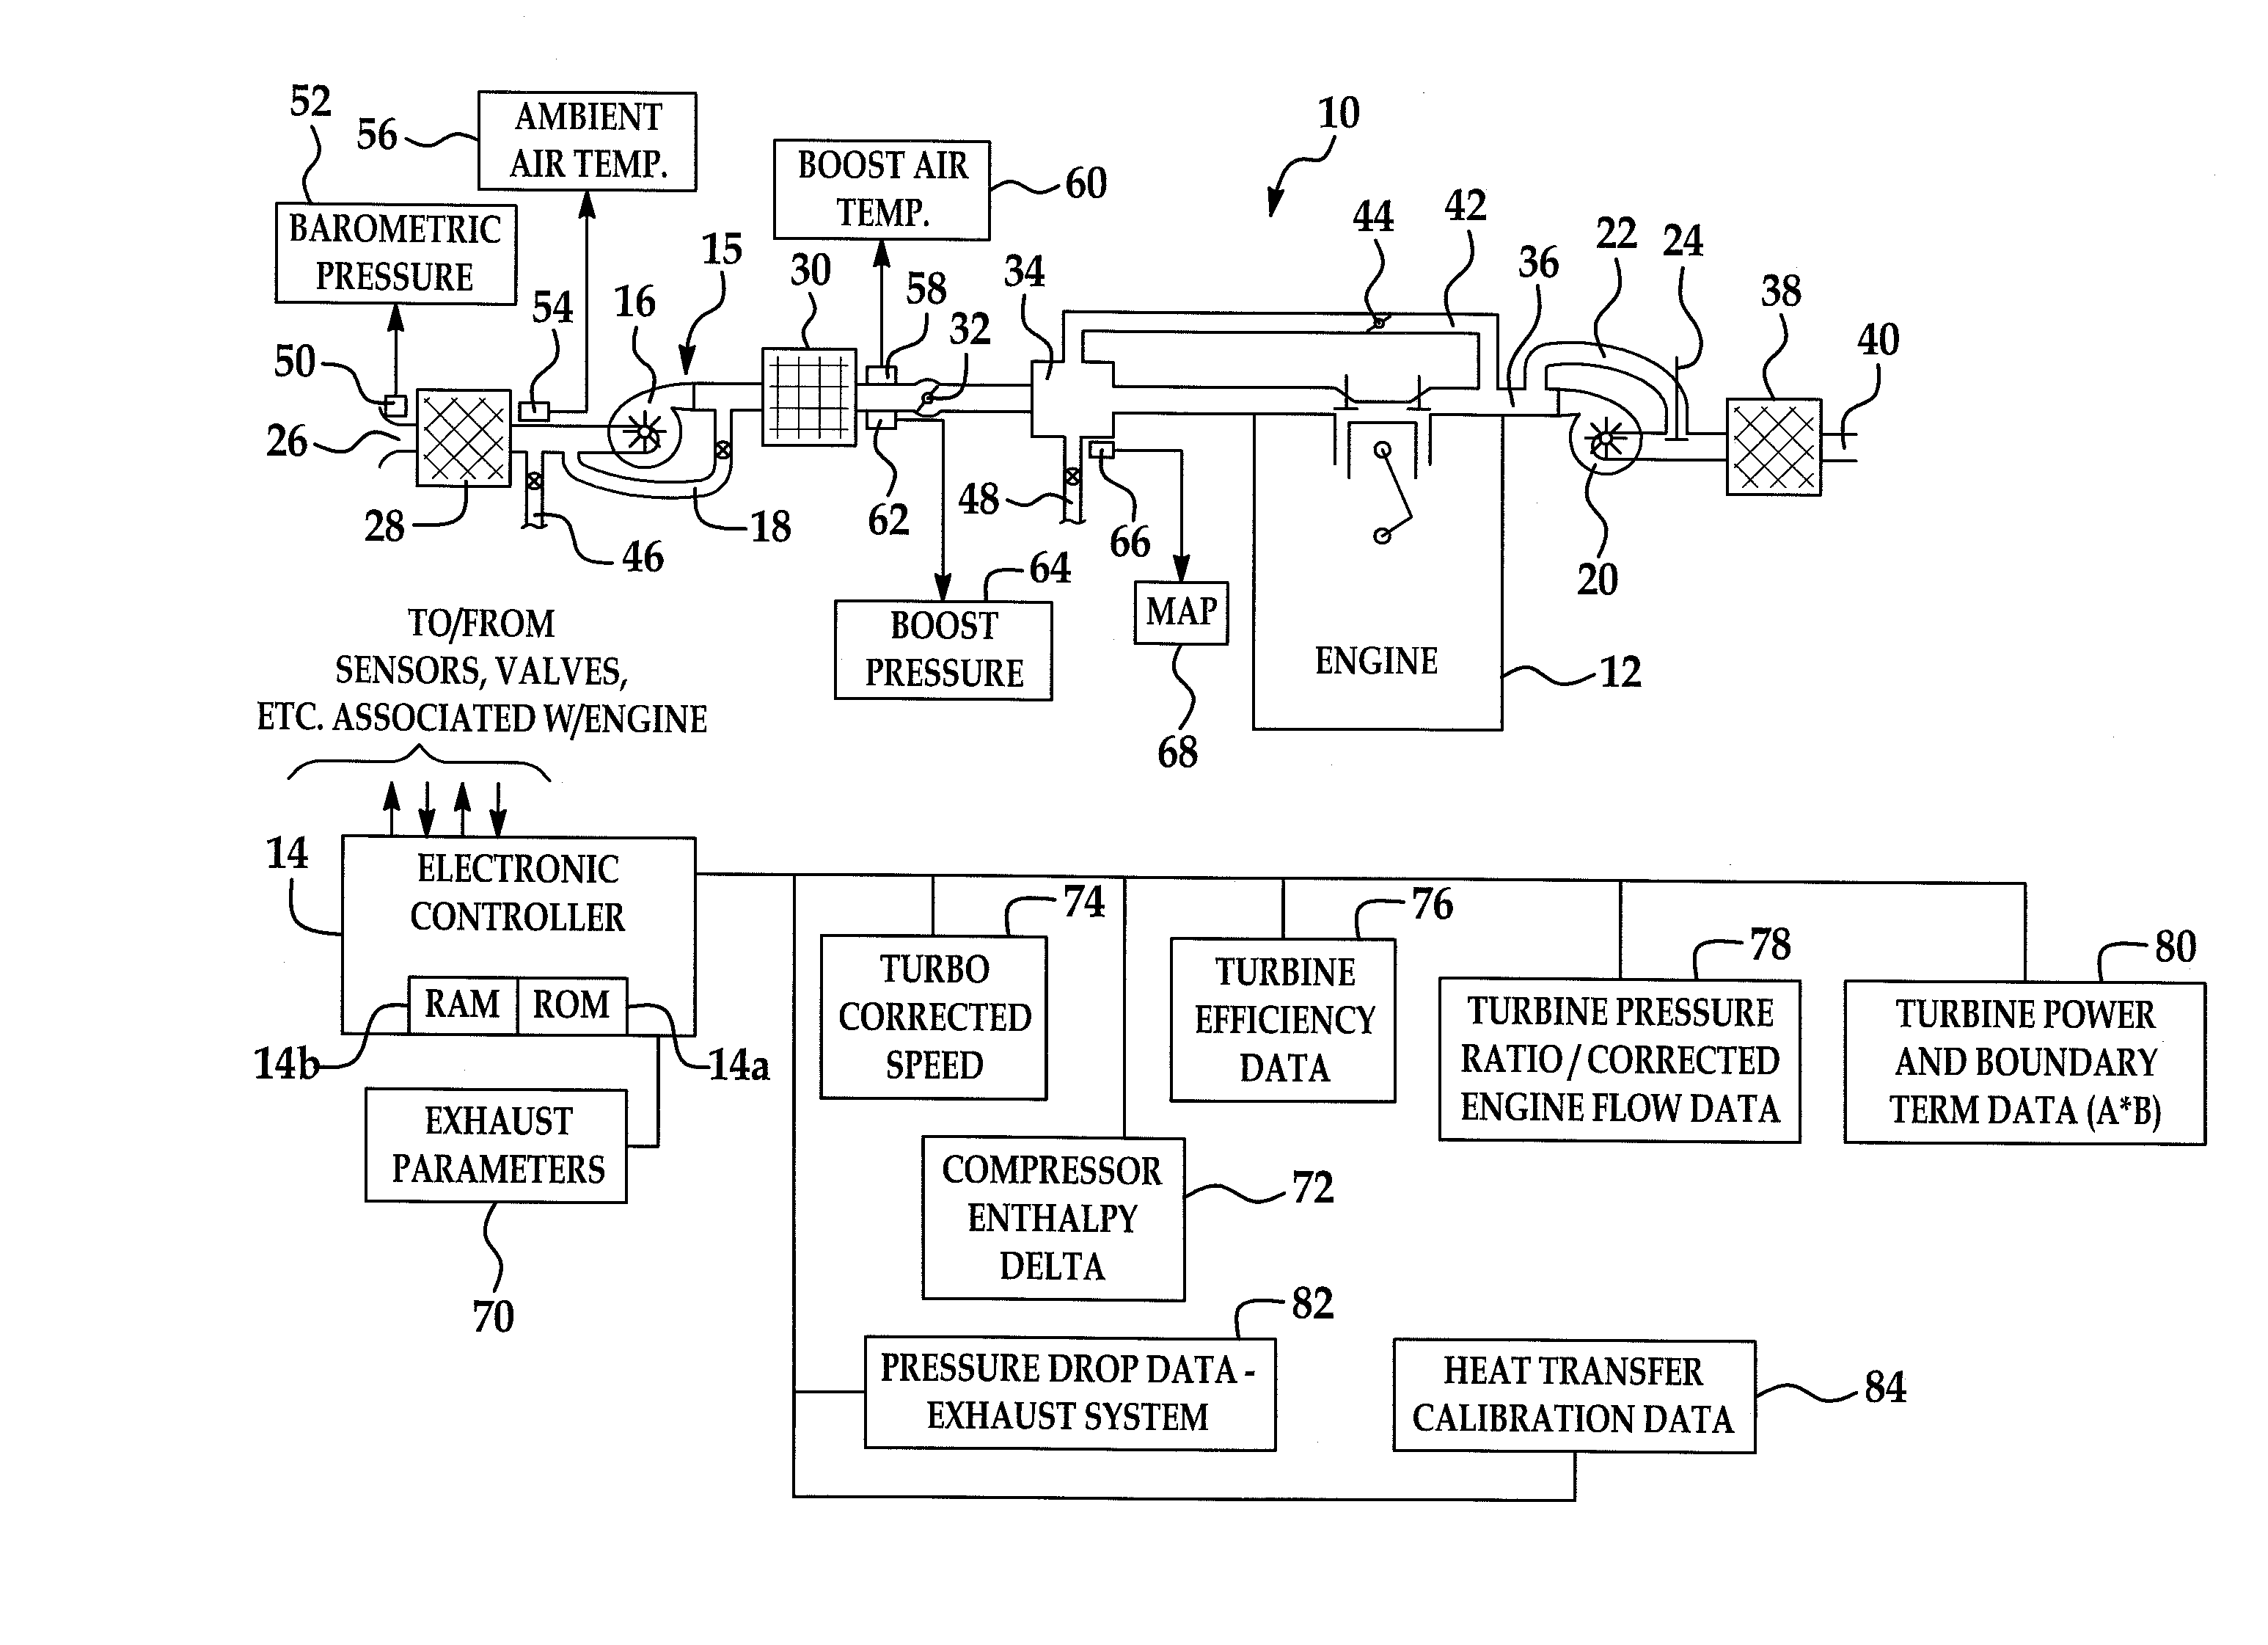 System and method for modeling of turbo-charged engines and indirect measurement of turbine and waste-gate flow and turbine efficiency